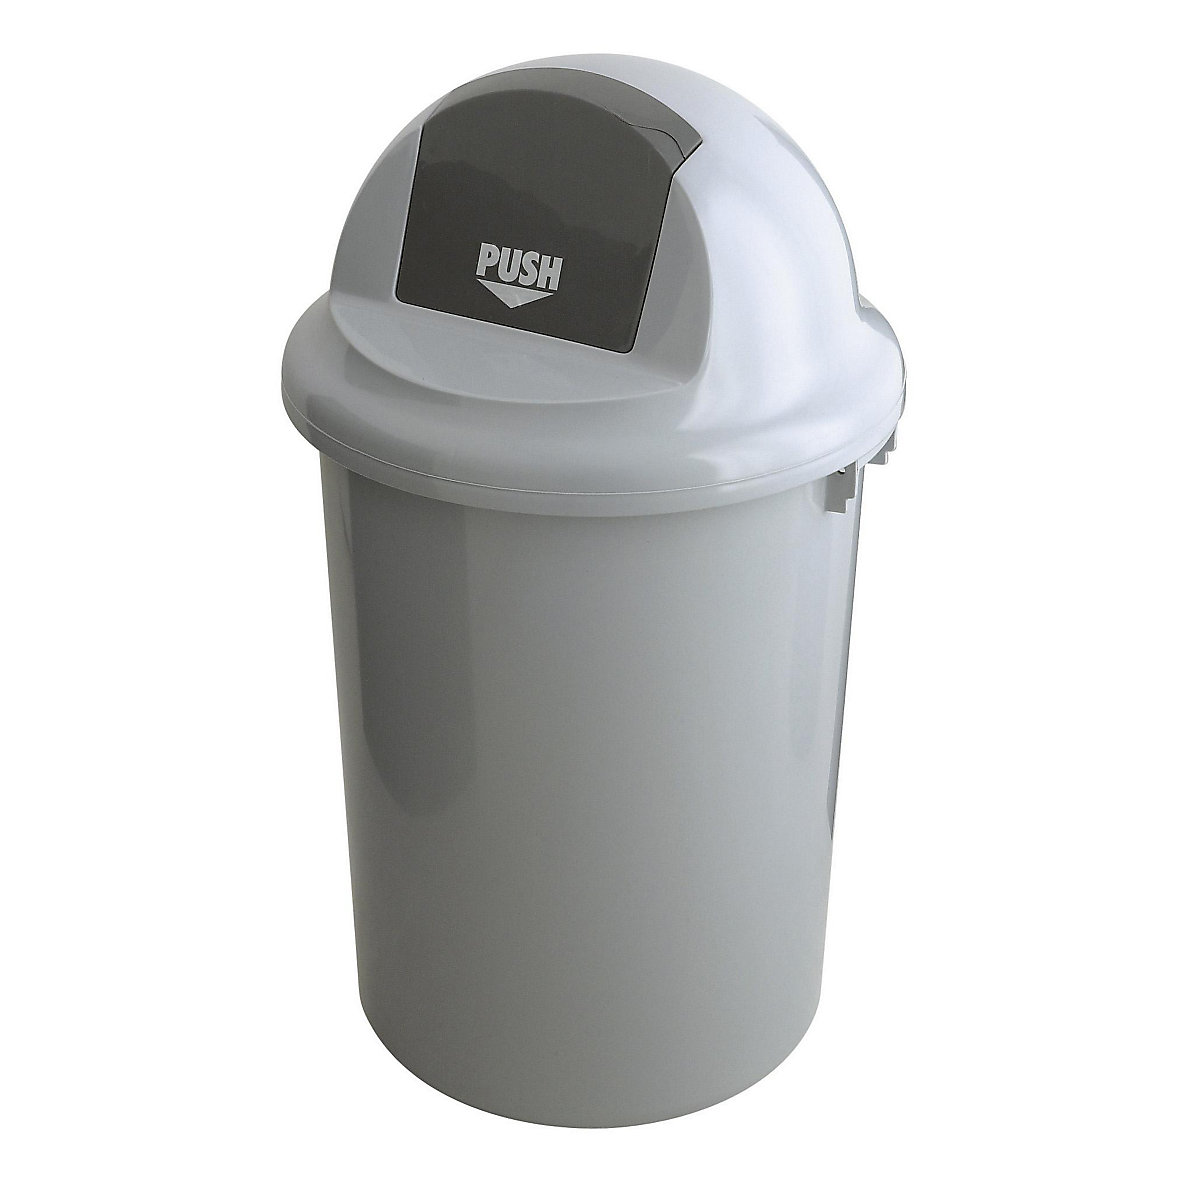 Waste collector with push lid